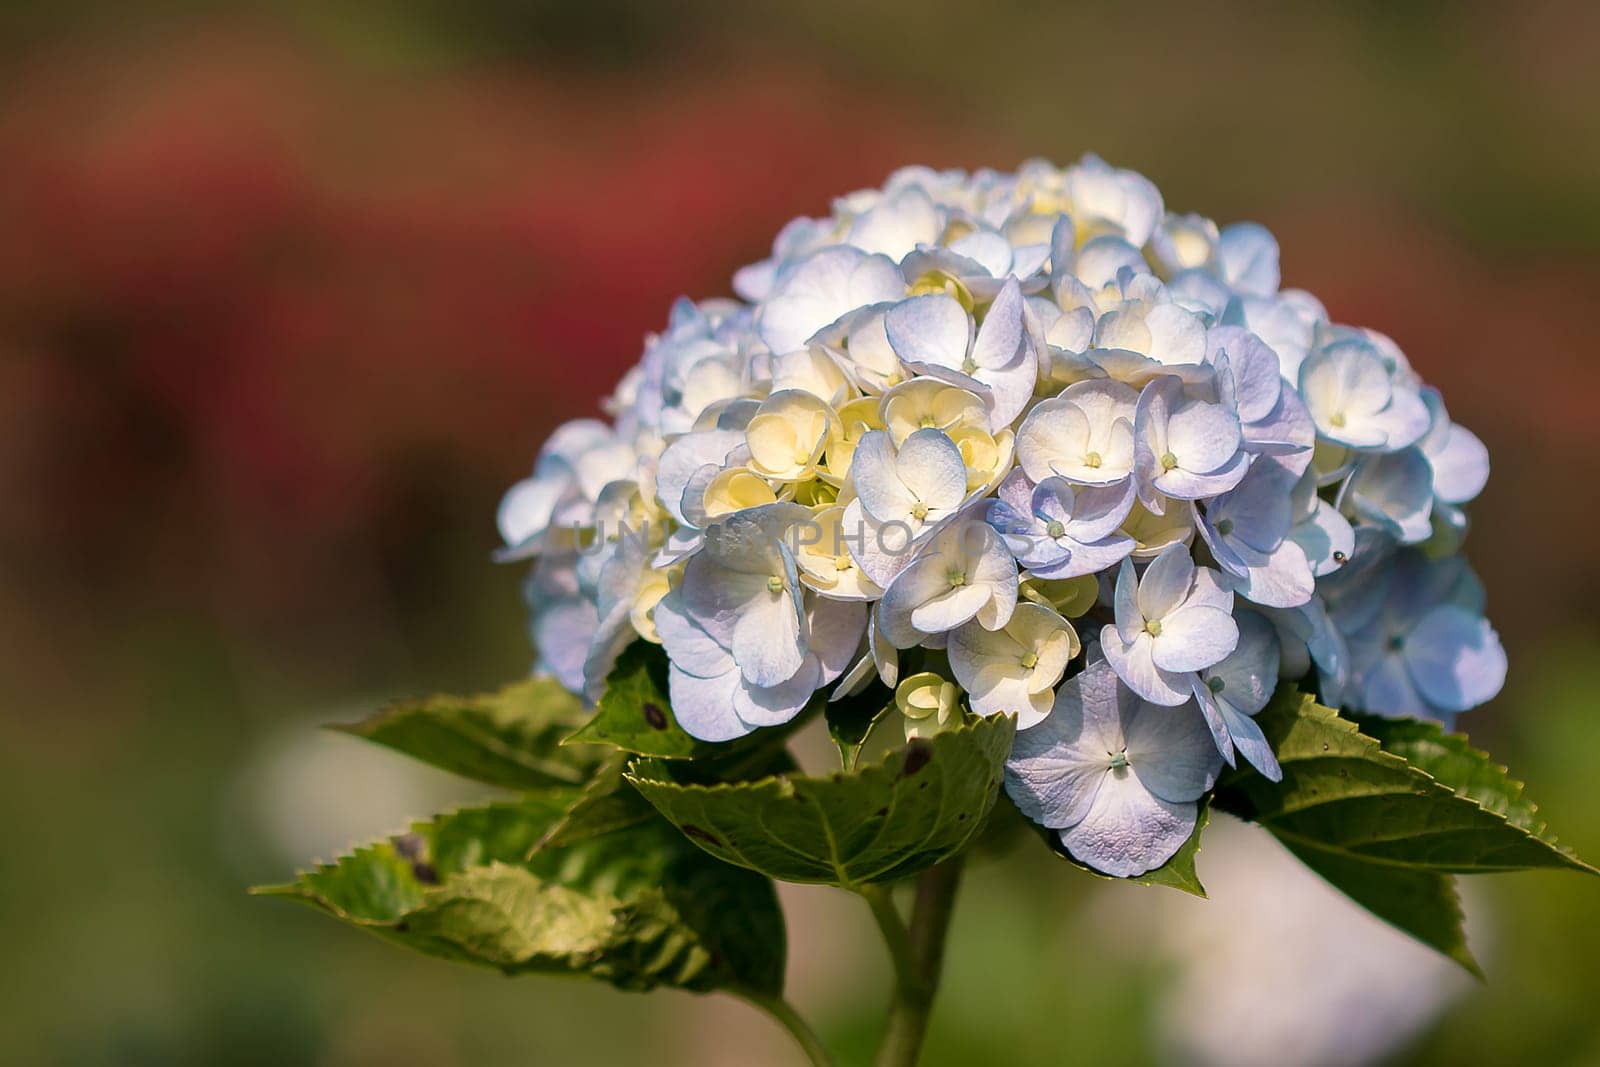 Hydrangea, yellow, mixed with purple, is blooming beautifully by Puripatt